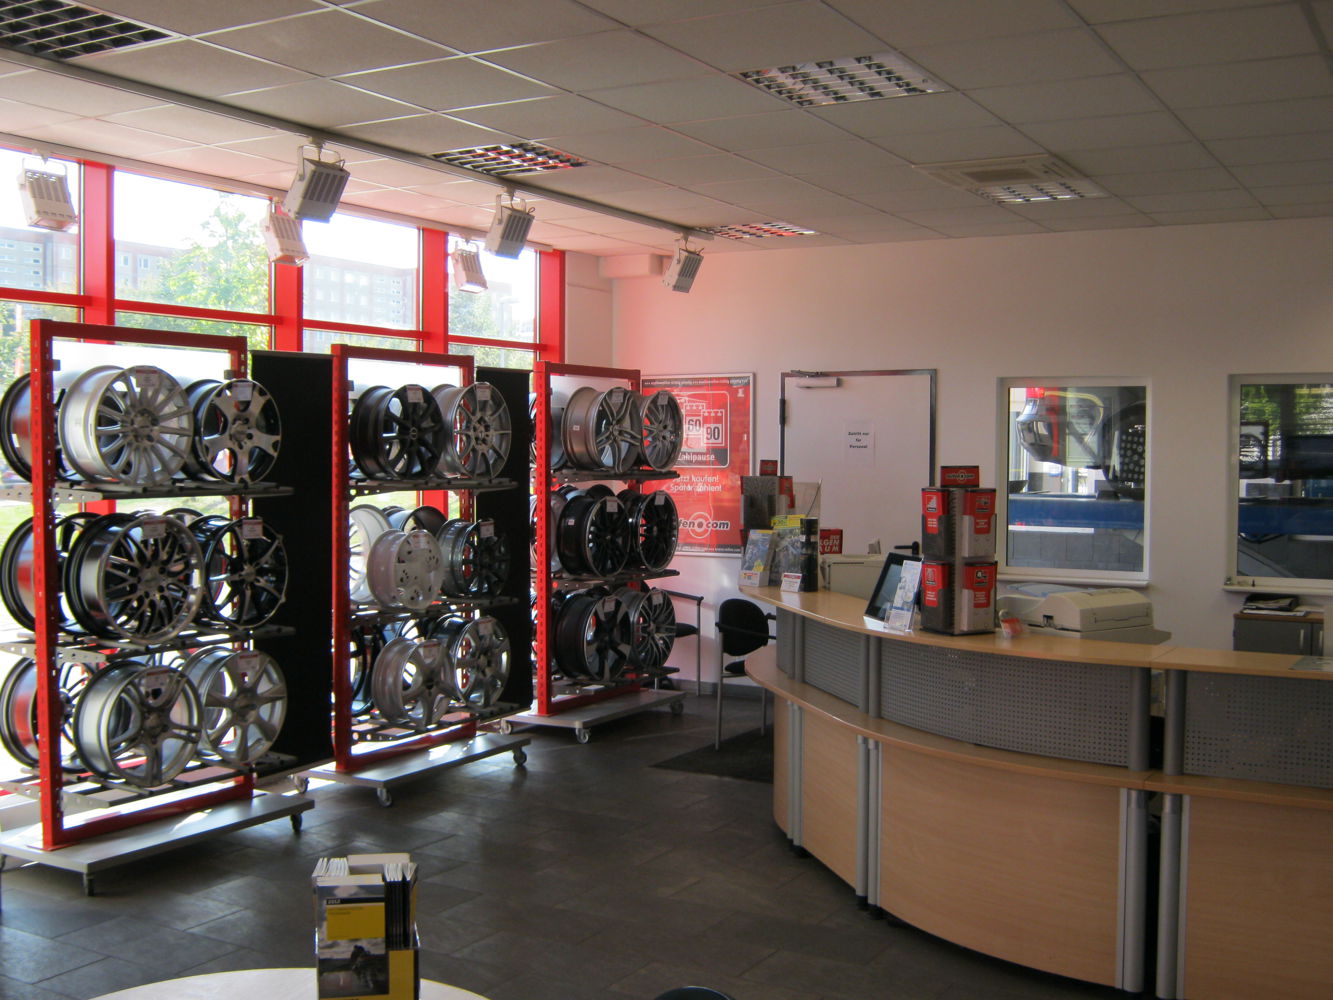 Reception area and rims showroom